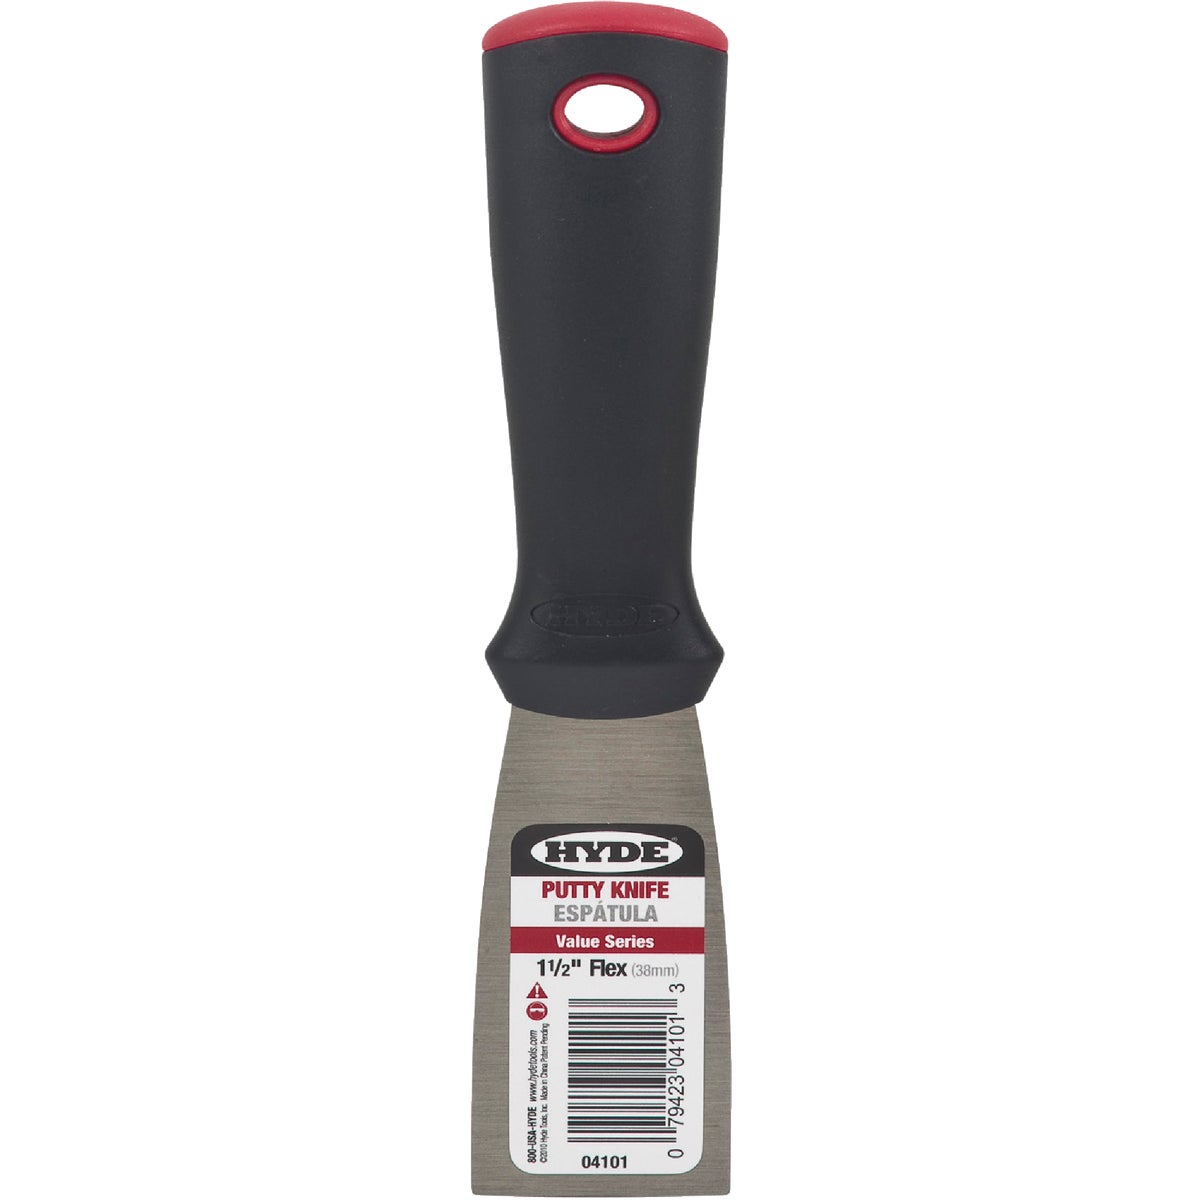 Item 786799, Economical putty knife with ergonomic handle shaped for comfort.